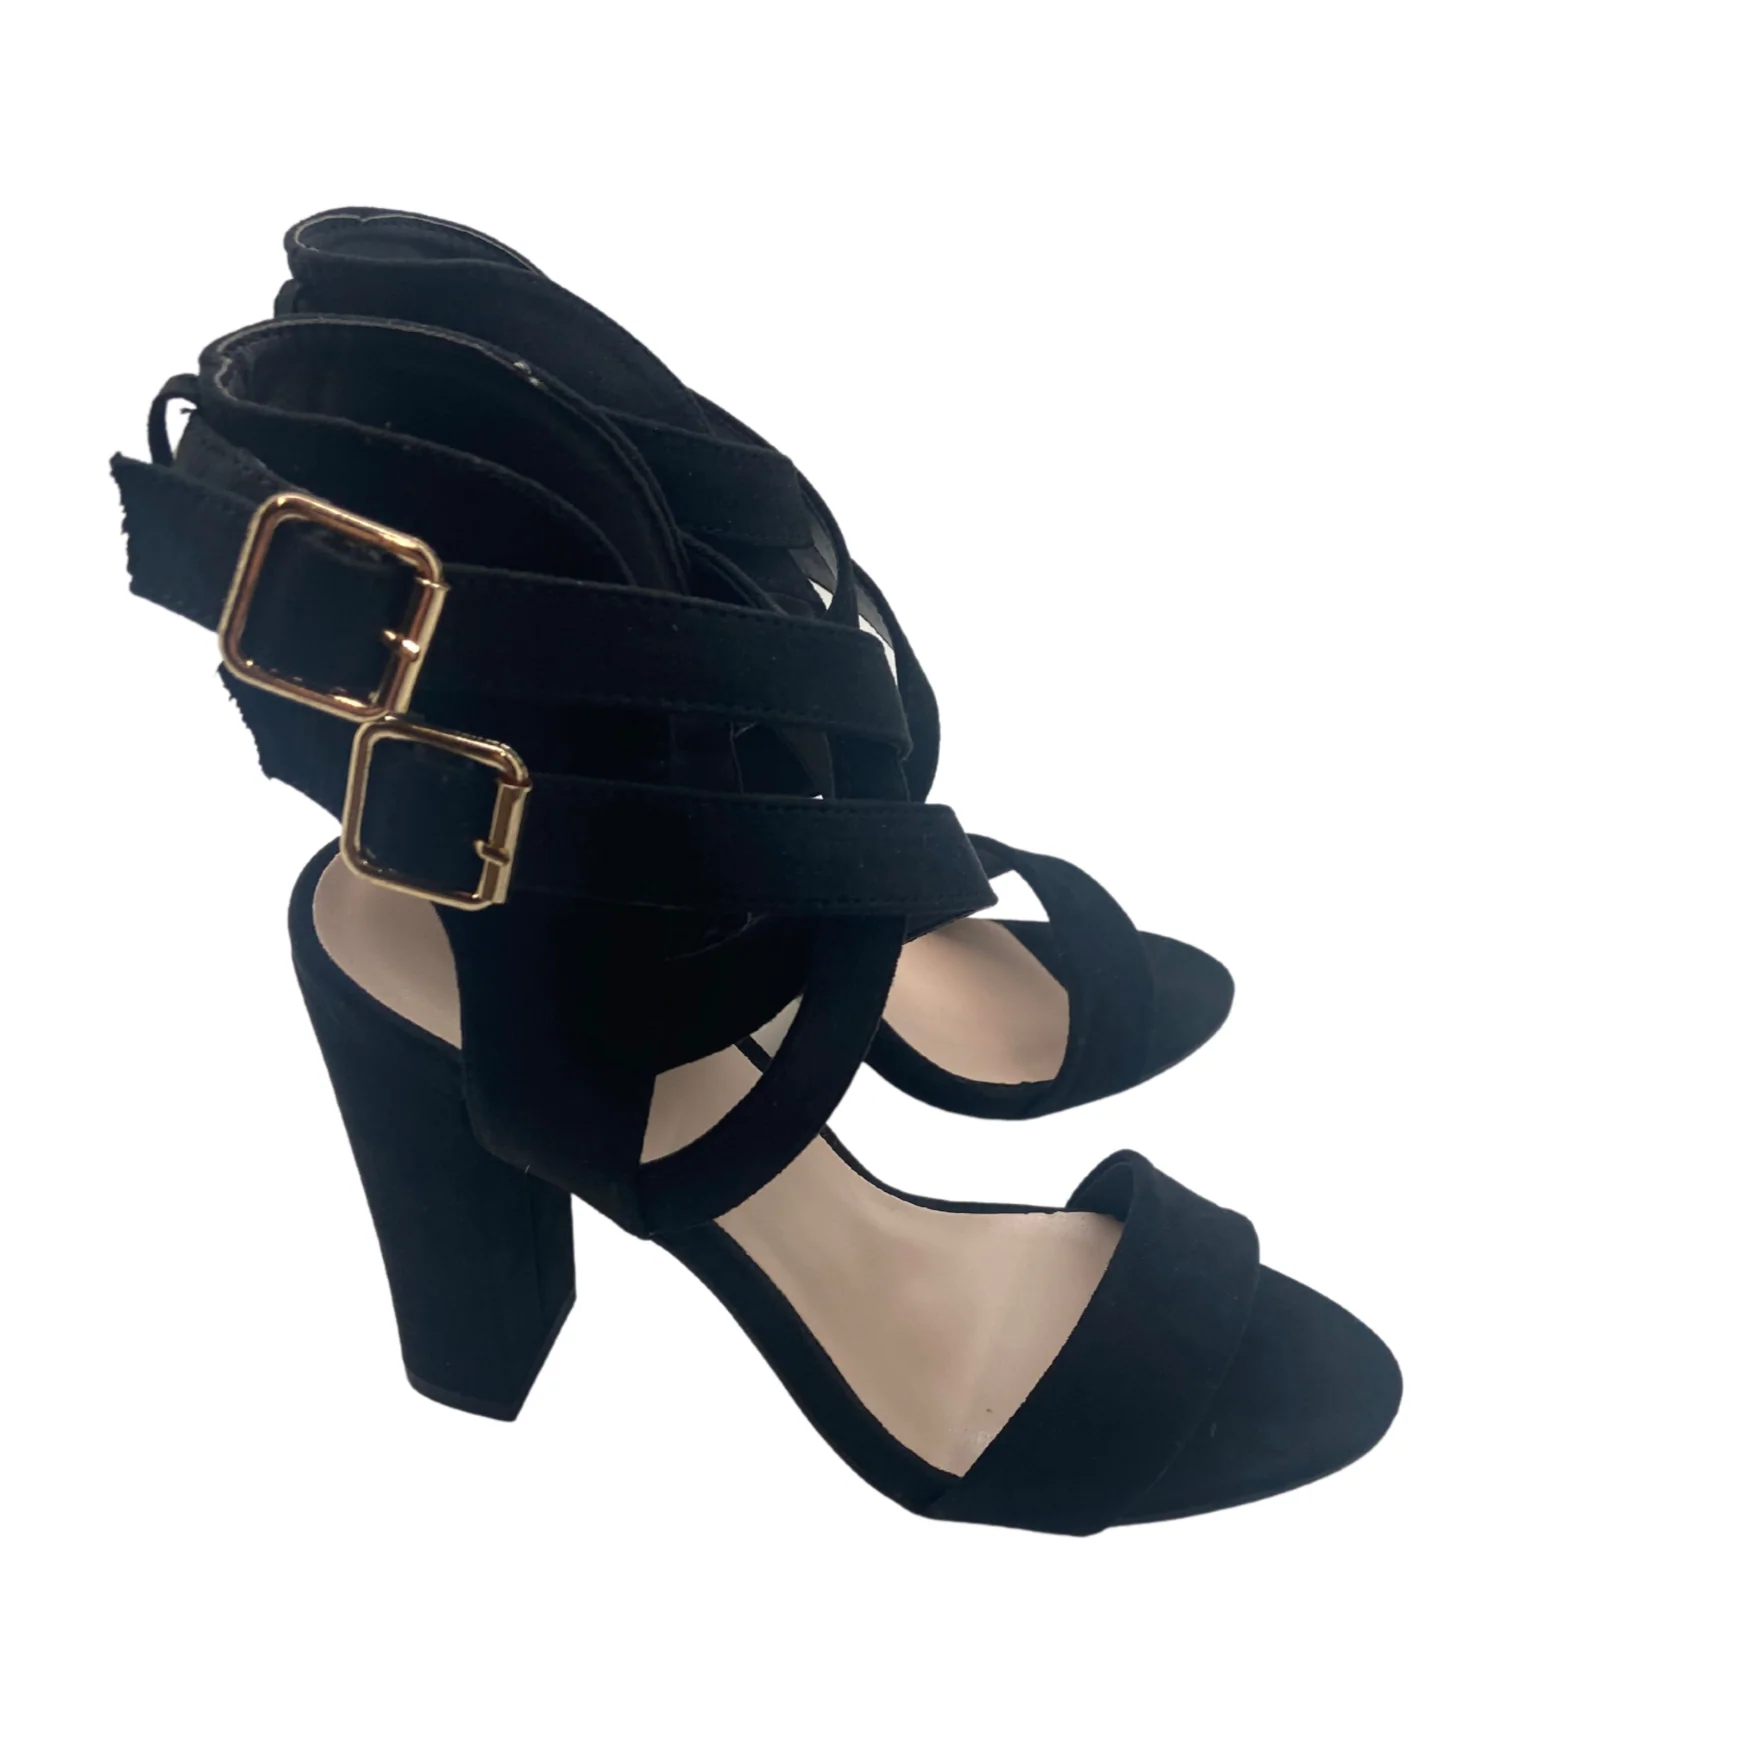 Women's Black Manmade Livveey 4-inch Heeled Sandal with Glowing Ankle Buckle